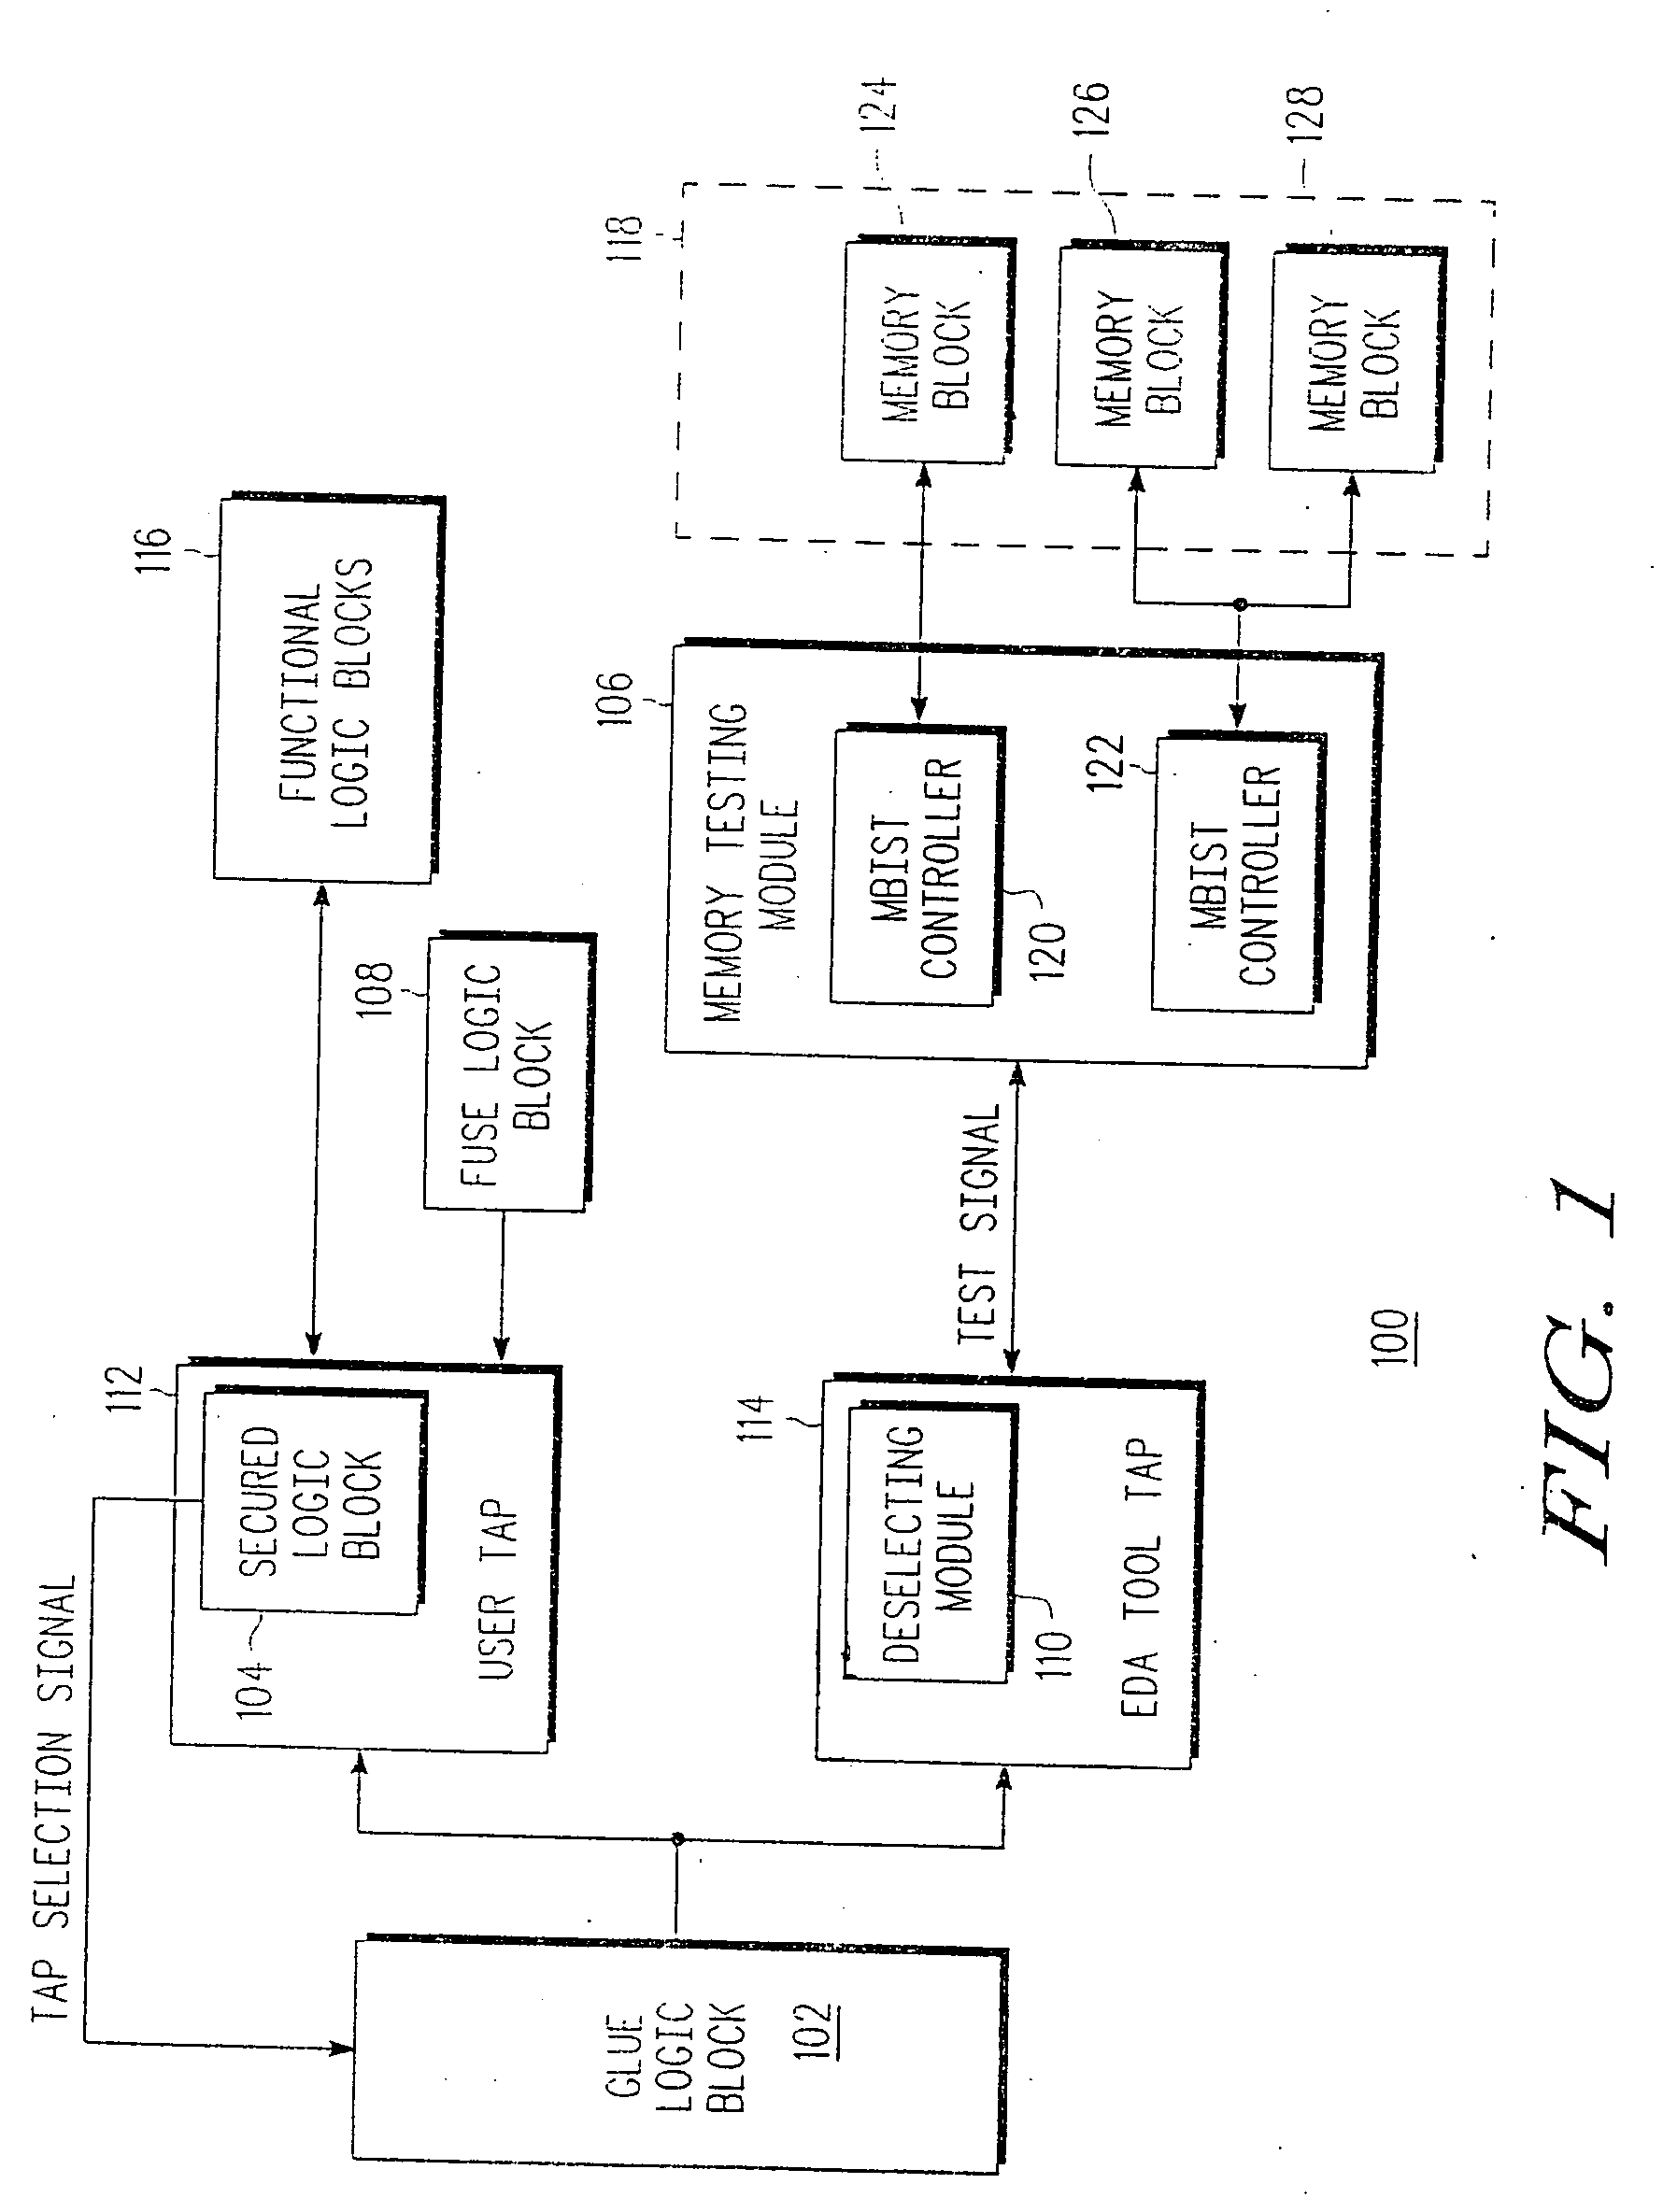 System and method for testing memory blocks in an soc design